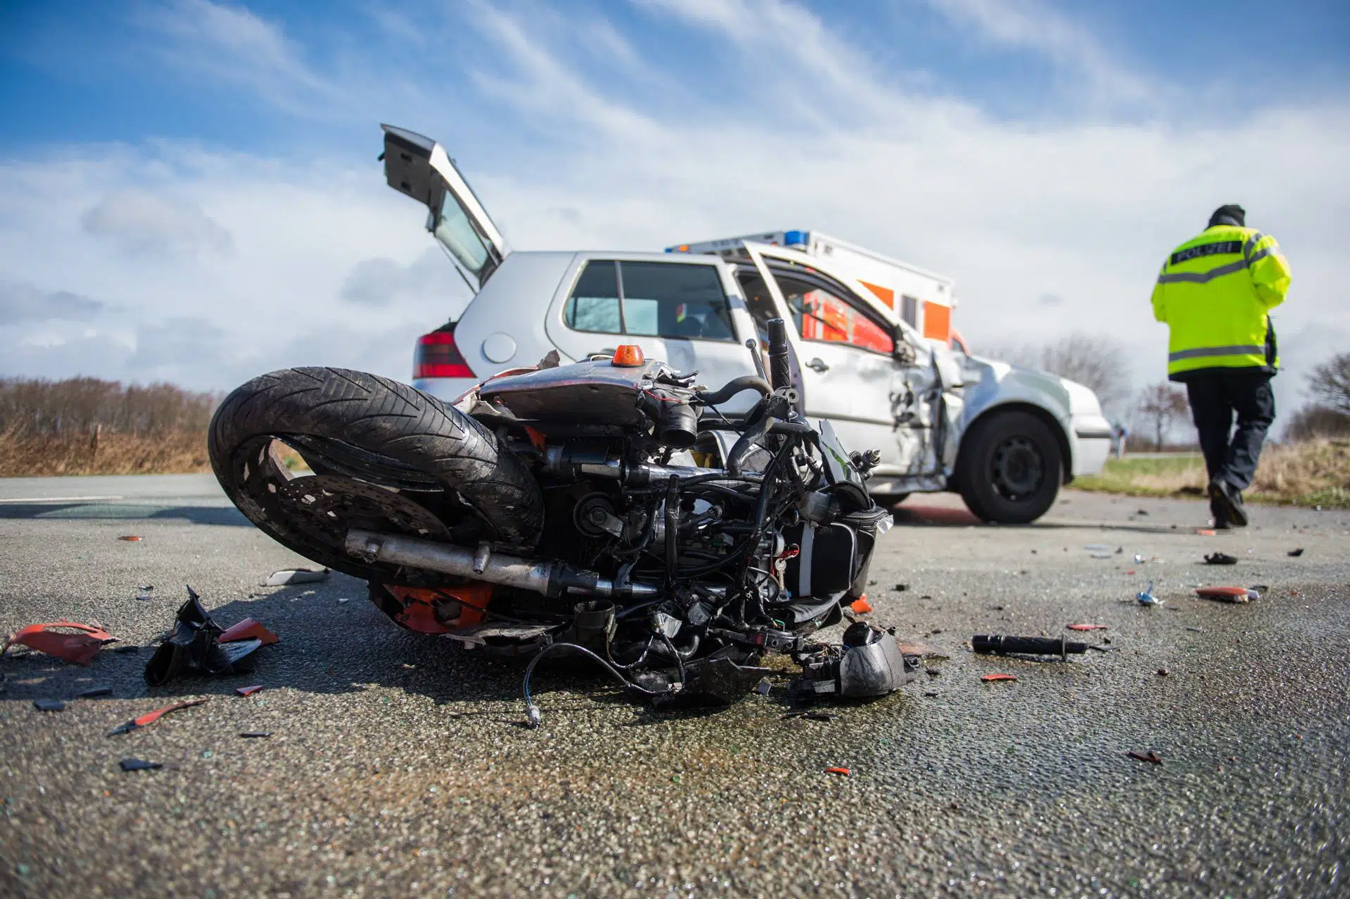 Types of Motorcycle Accidents